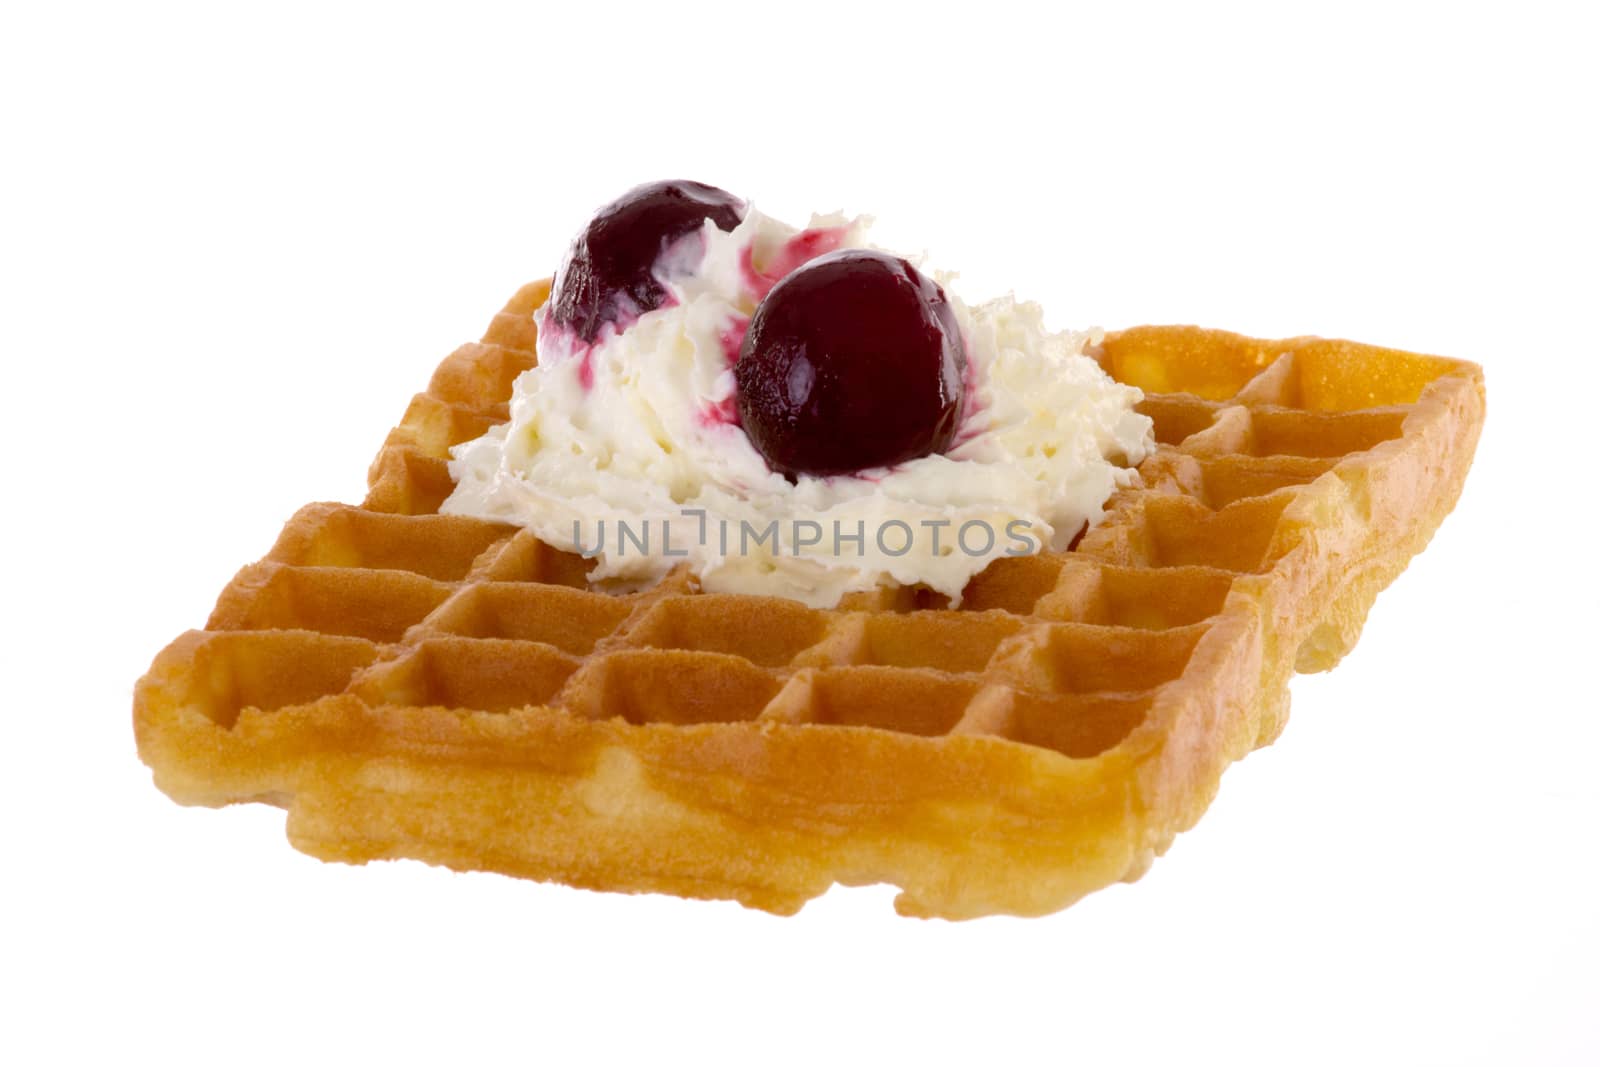 Brussels waffle with cream and cherries